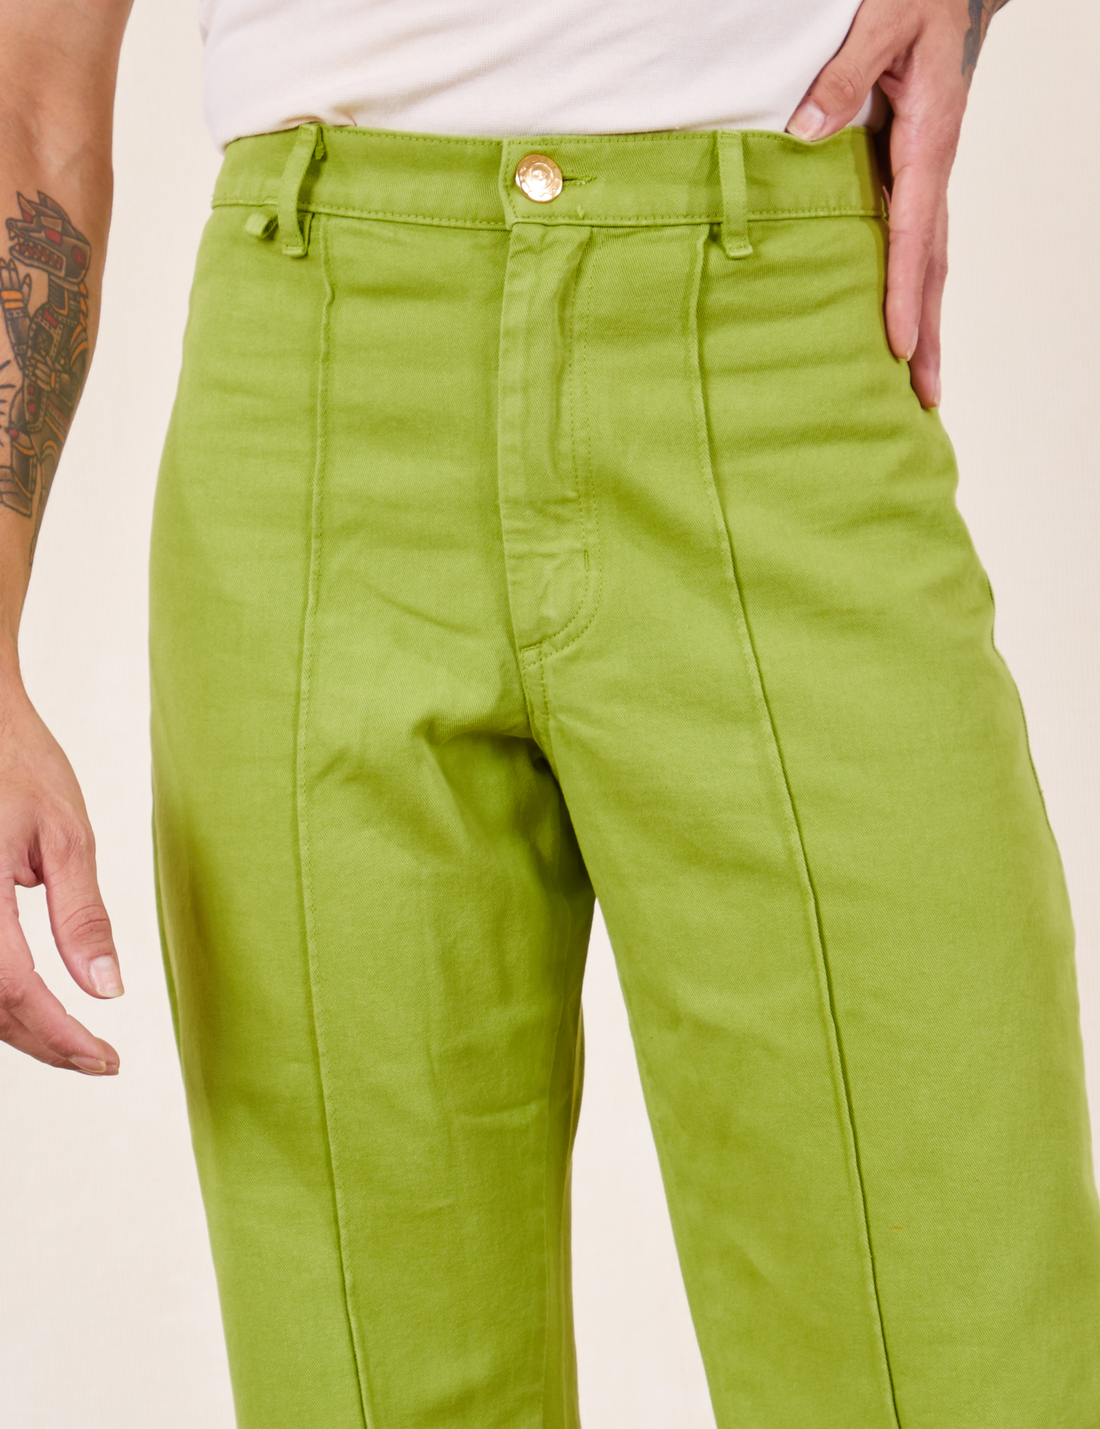 Western Pants in Gross Green front close up on Jesse